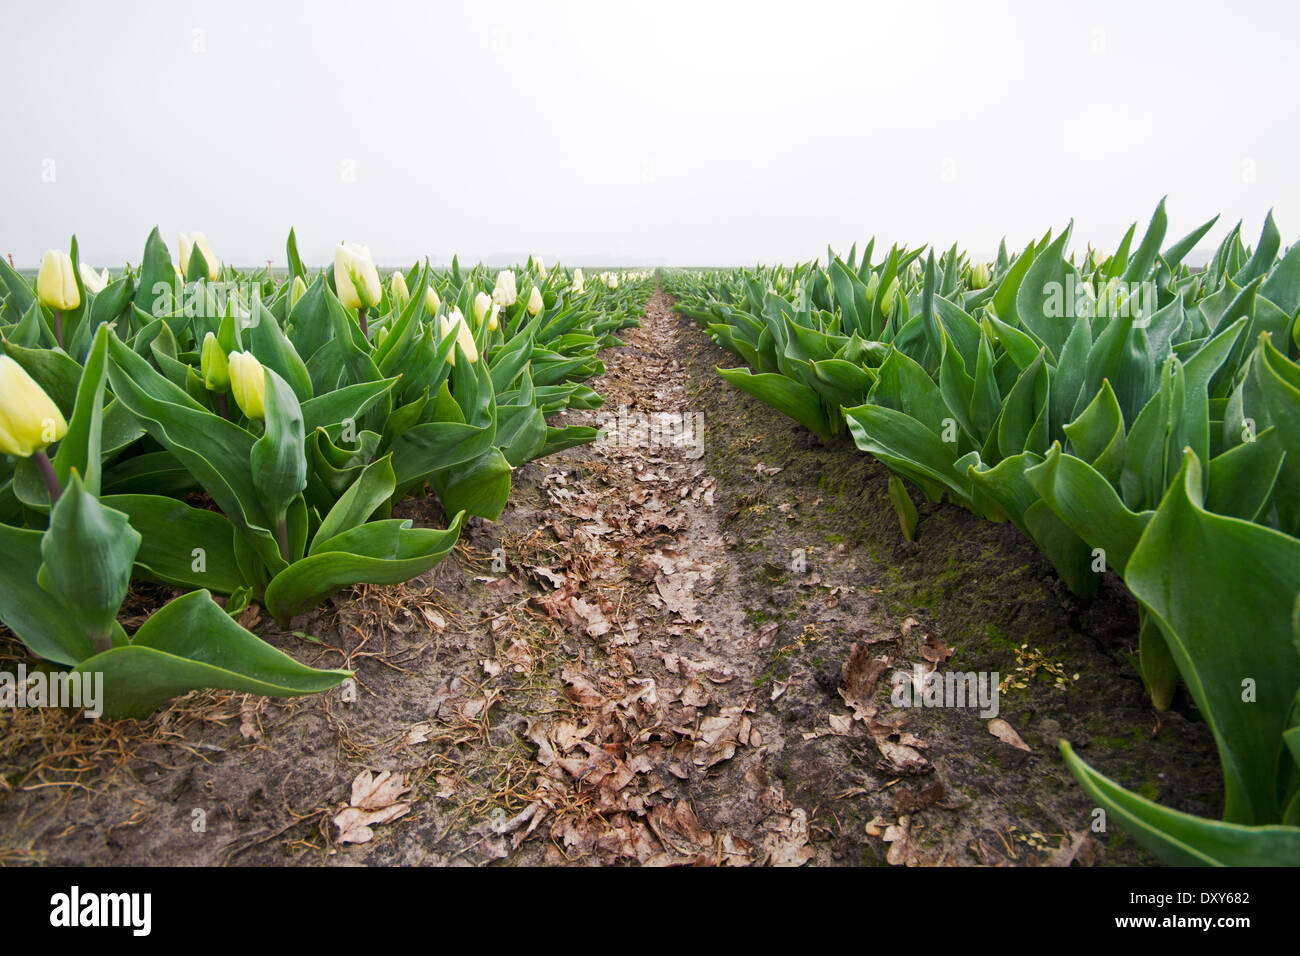 Tulips in horticulture Stock Photo